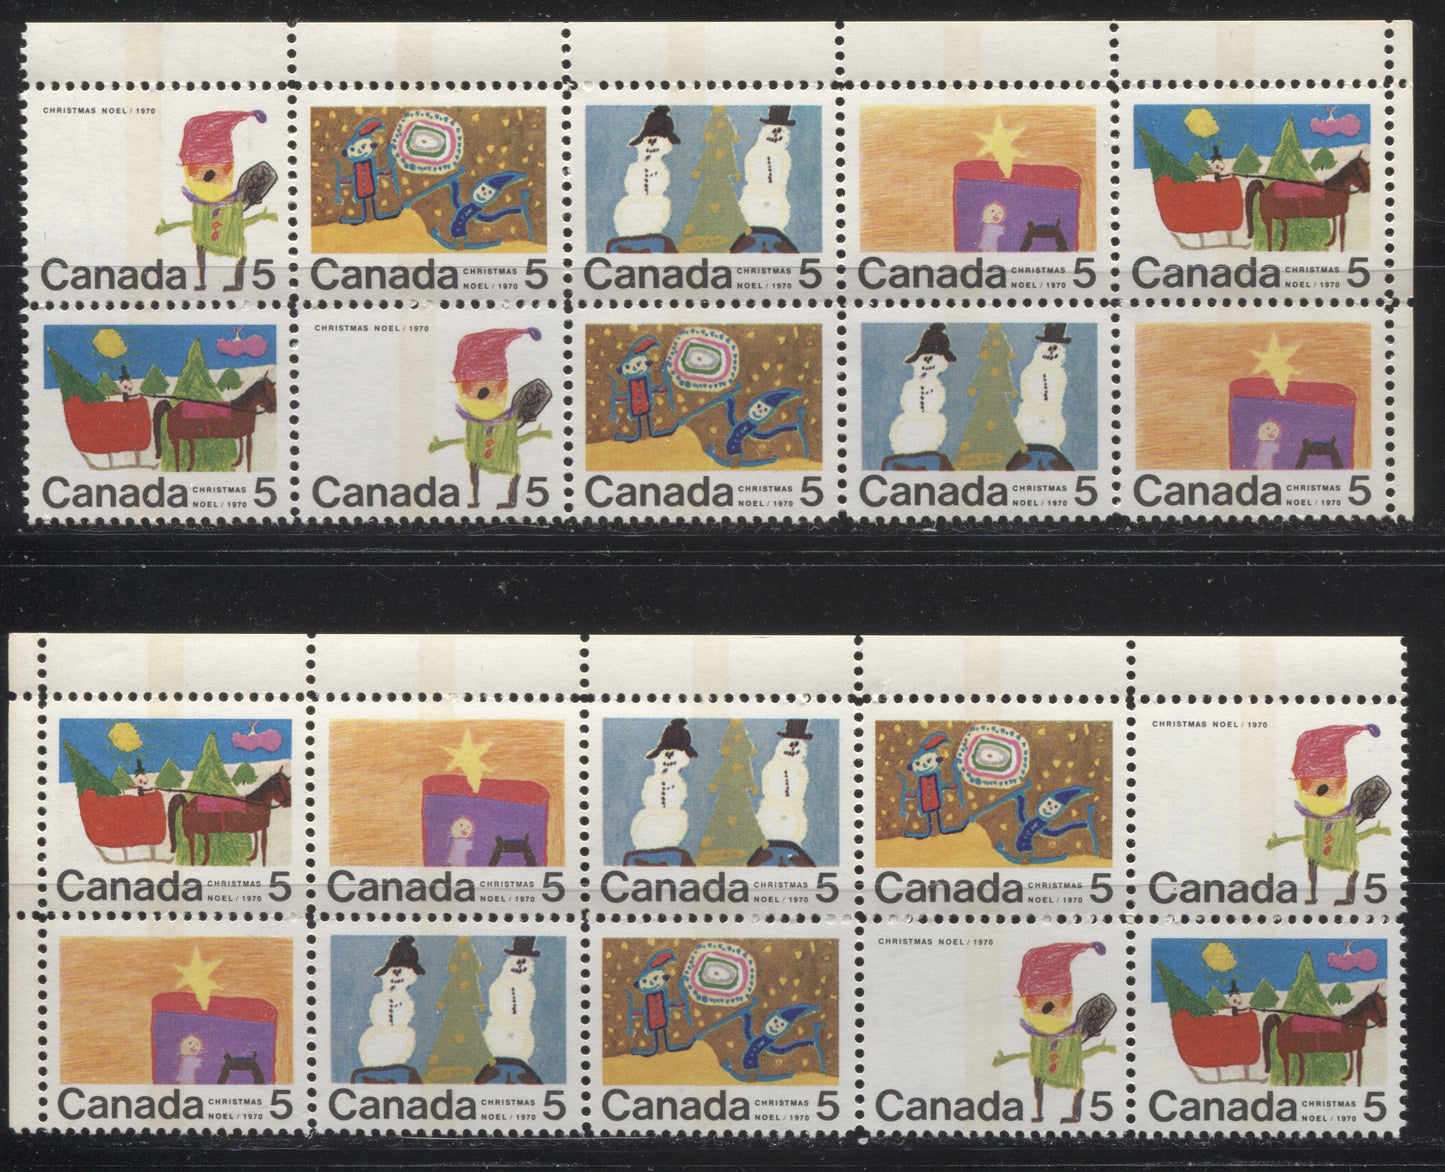 Lot 105 Canada #519p-523p 5c Multicoloured 1970 Christmas Issue, Two VFNH Upper Left and Upper Right Winnipeg Tagged Corner Blocks of 10 on Ribbed HB11, Perfs 11.95 x 11.9